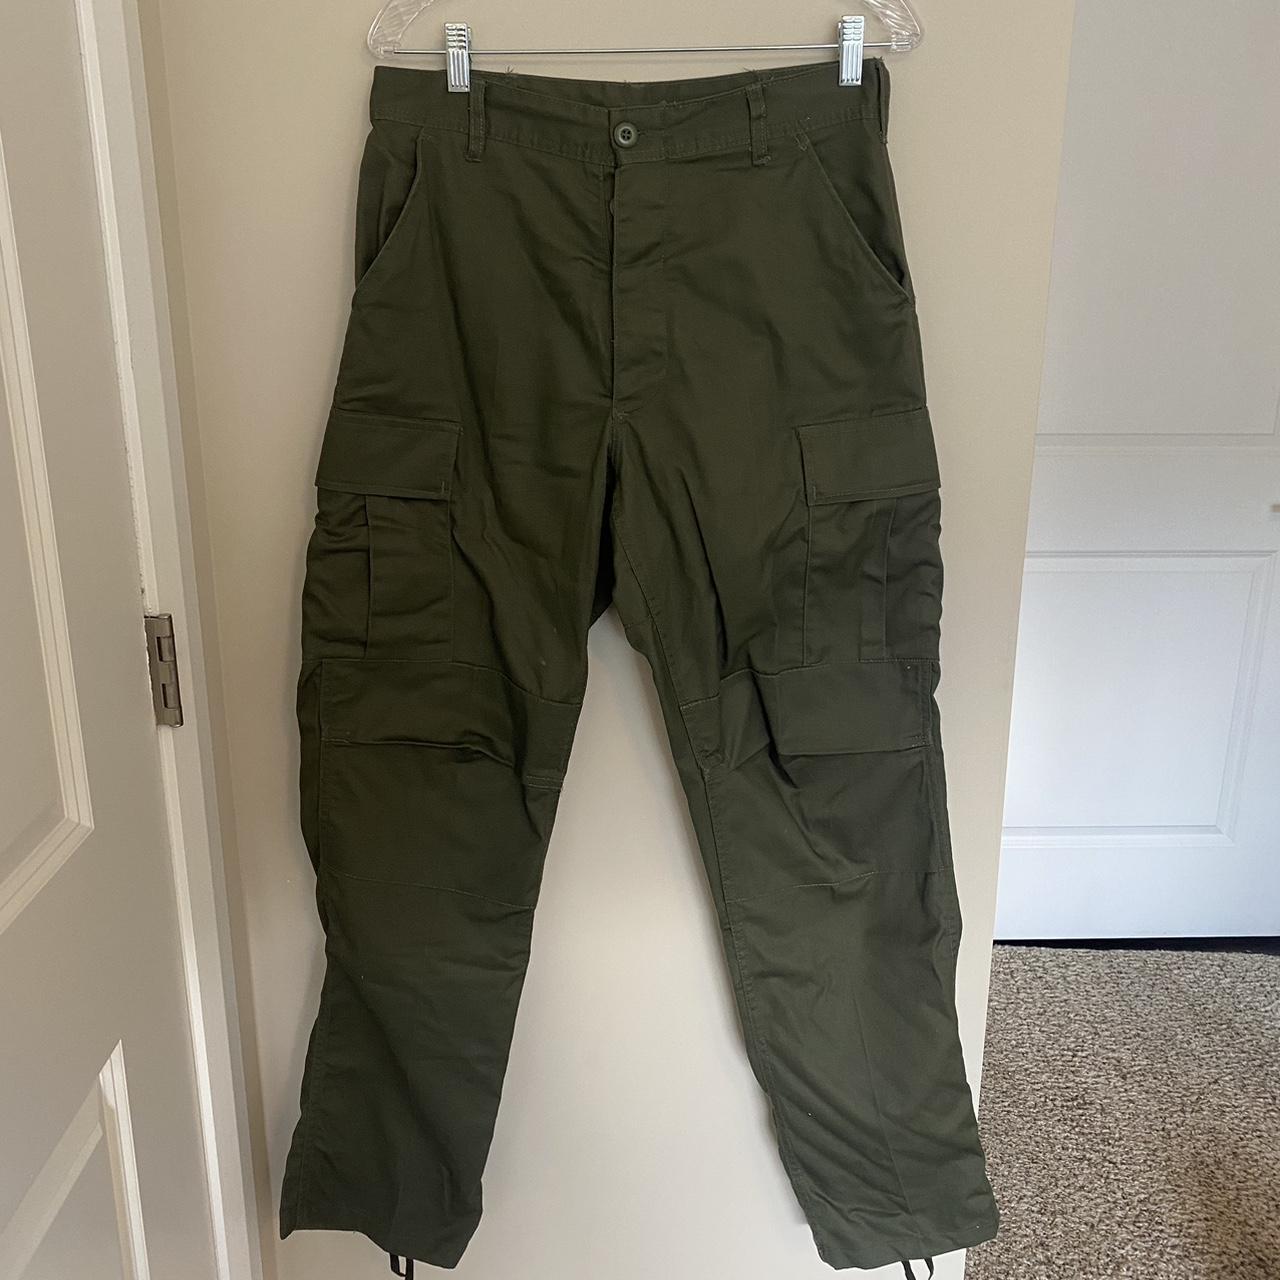 Urban Outfitters Cargo Pants - Depop